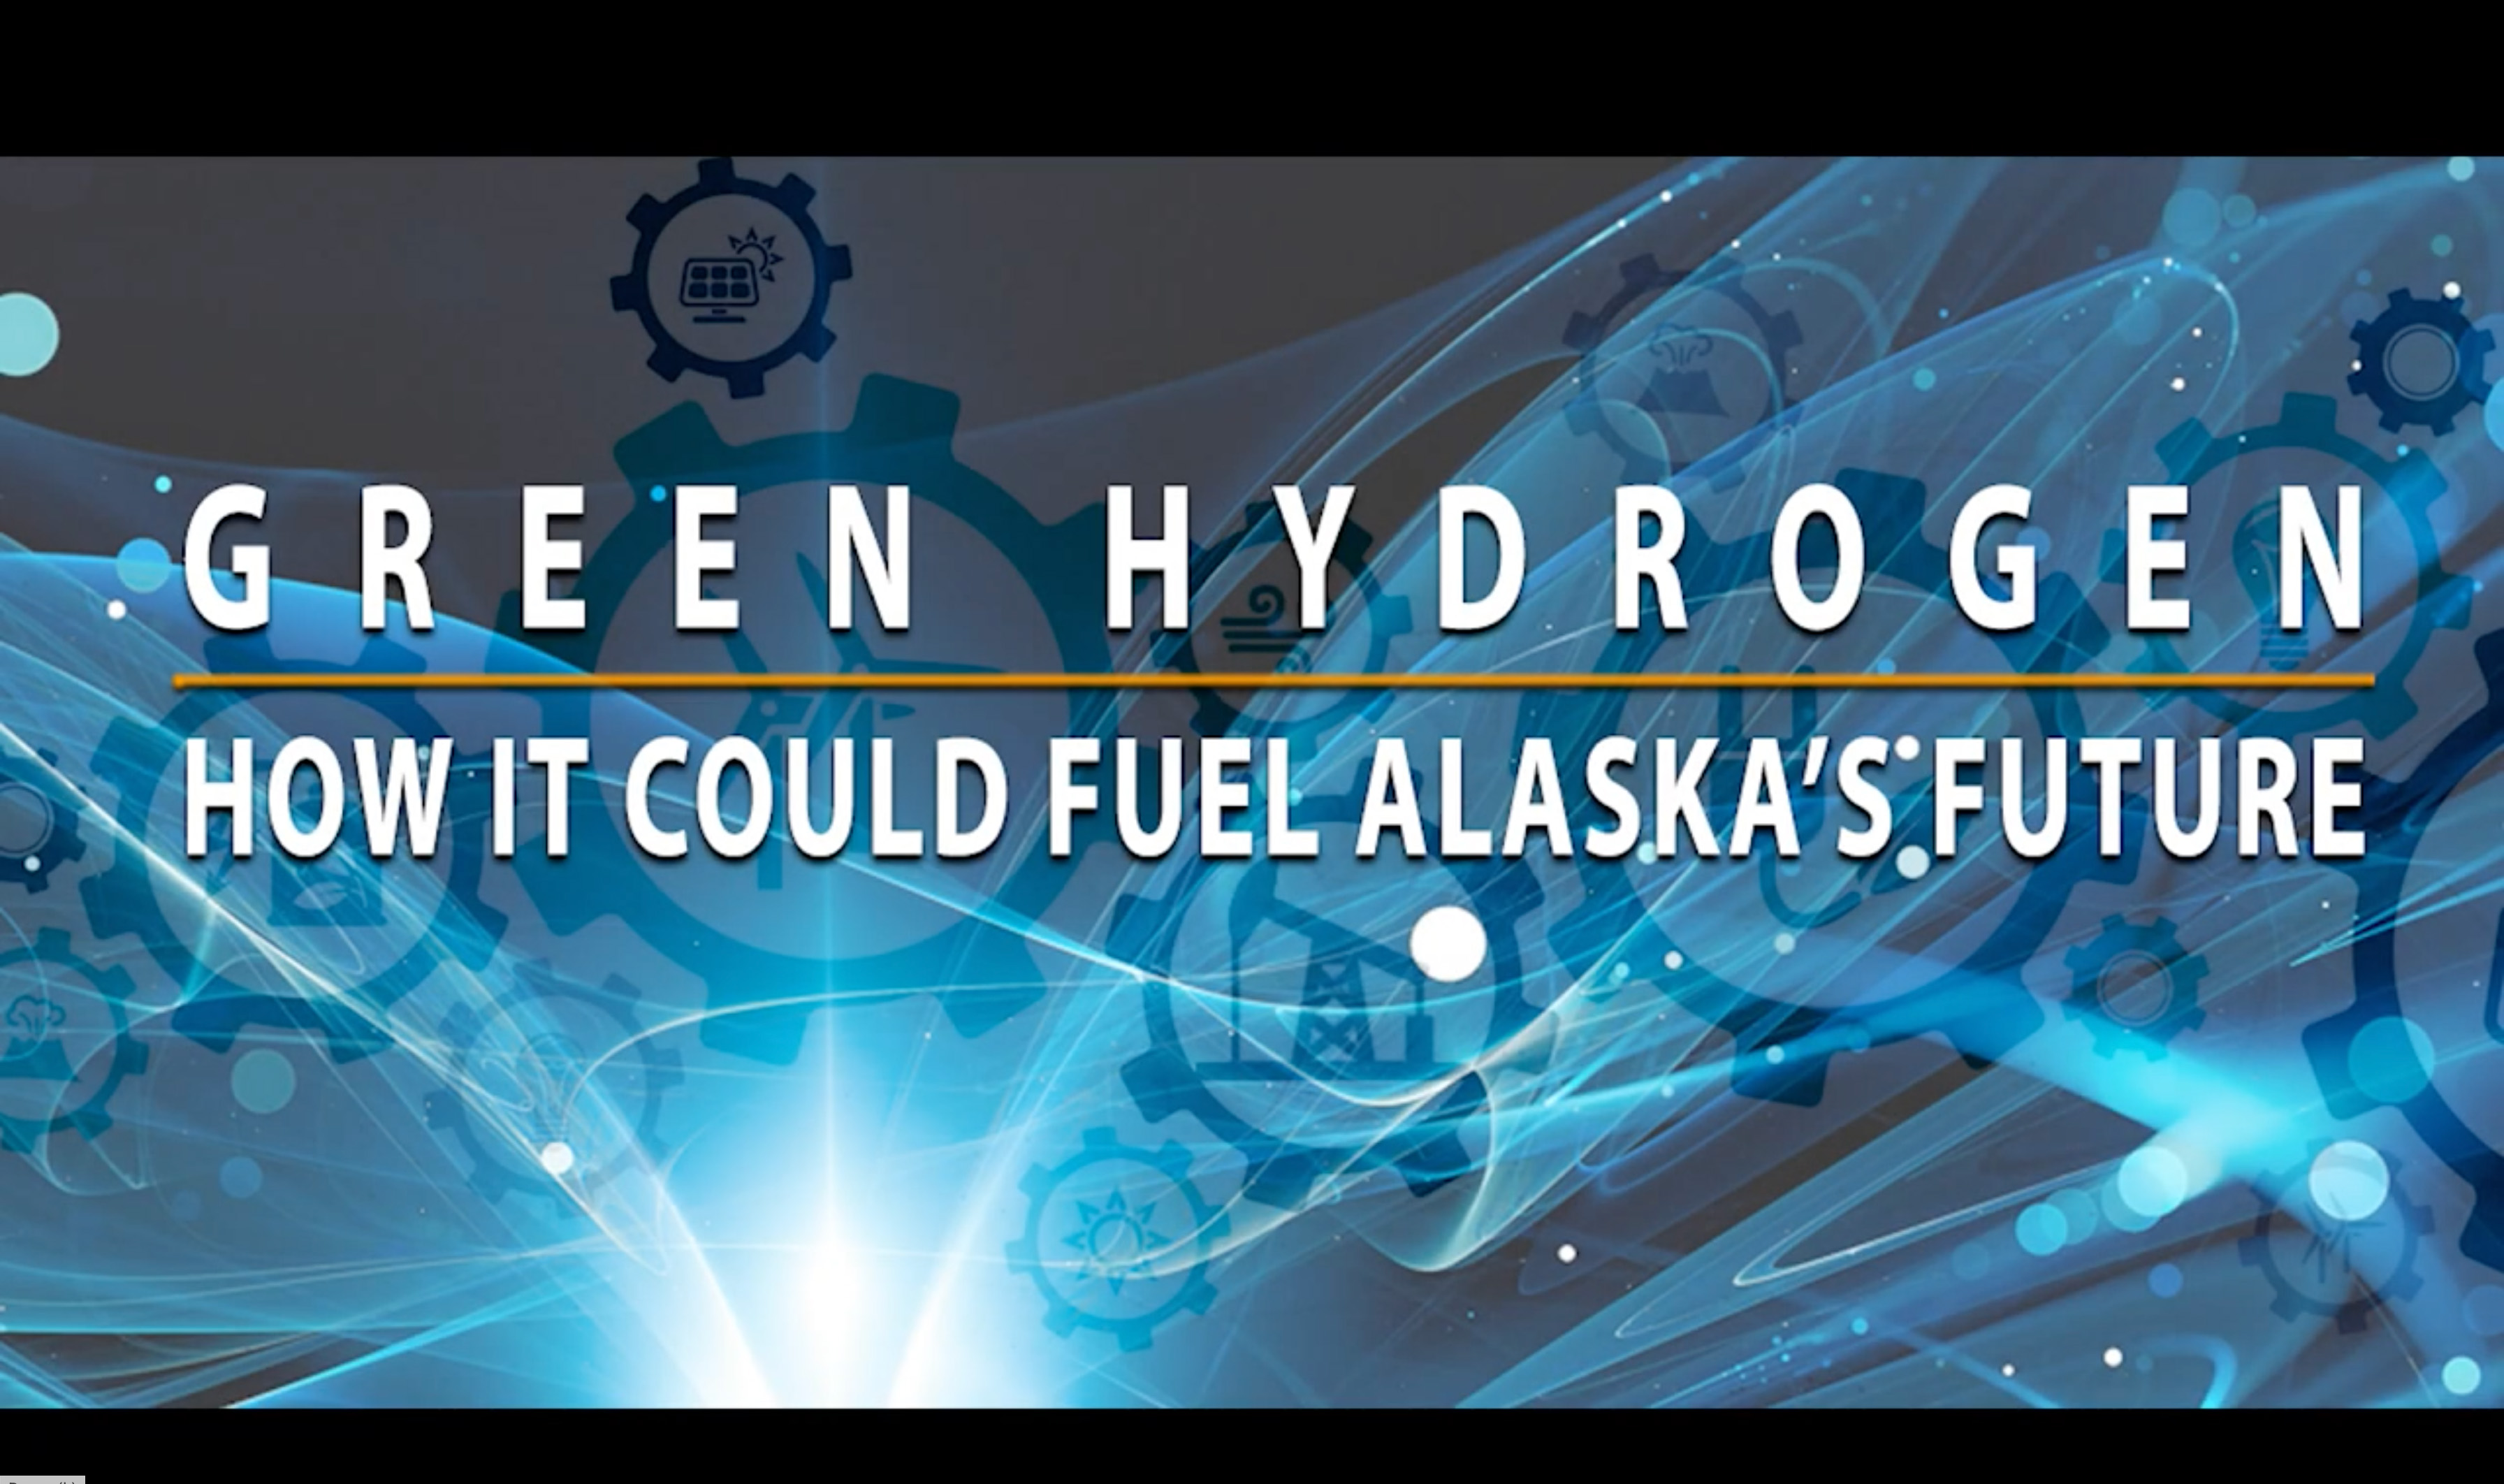 Launch Alaska Shares How Green Hydrogen Could Be in Alaska’s Future